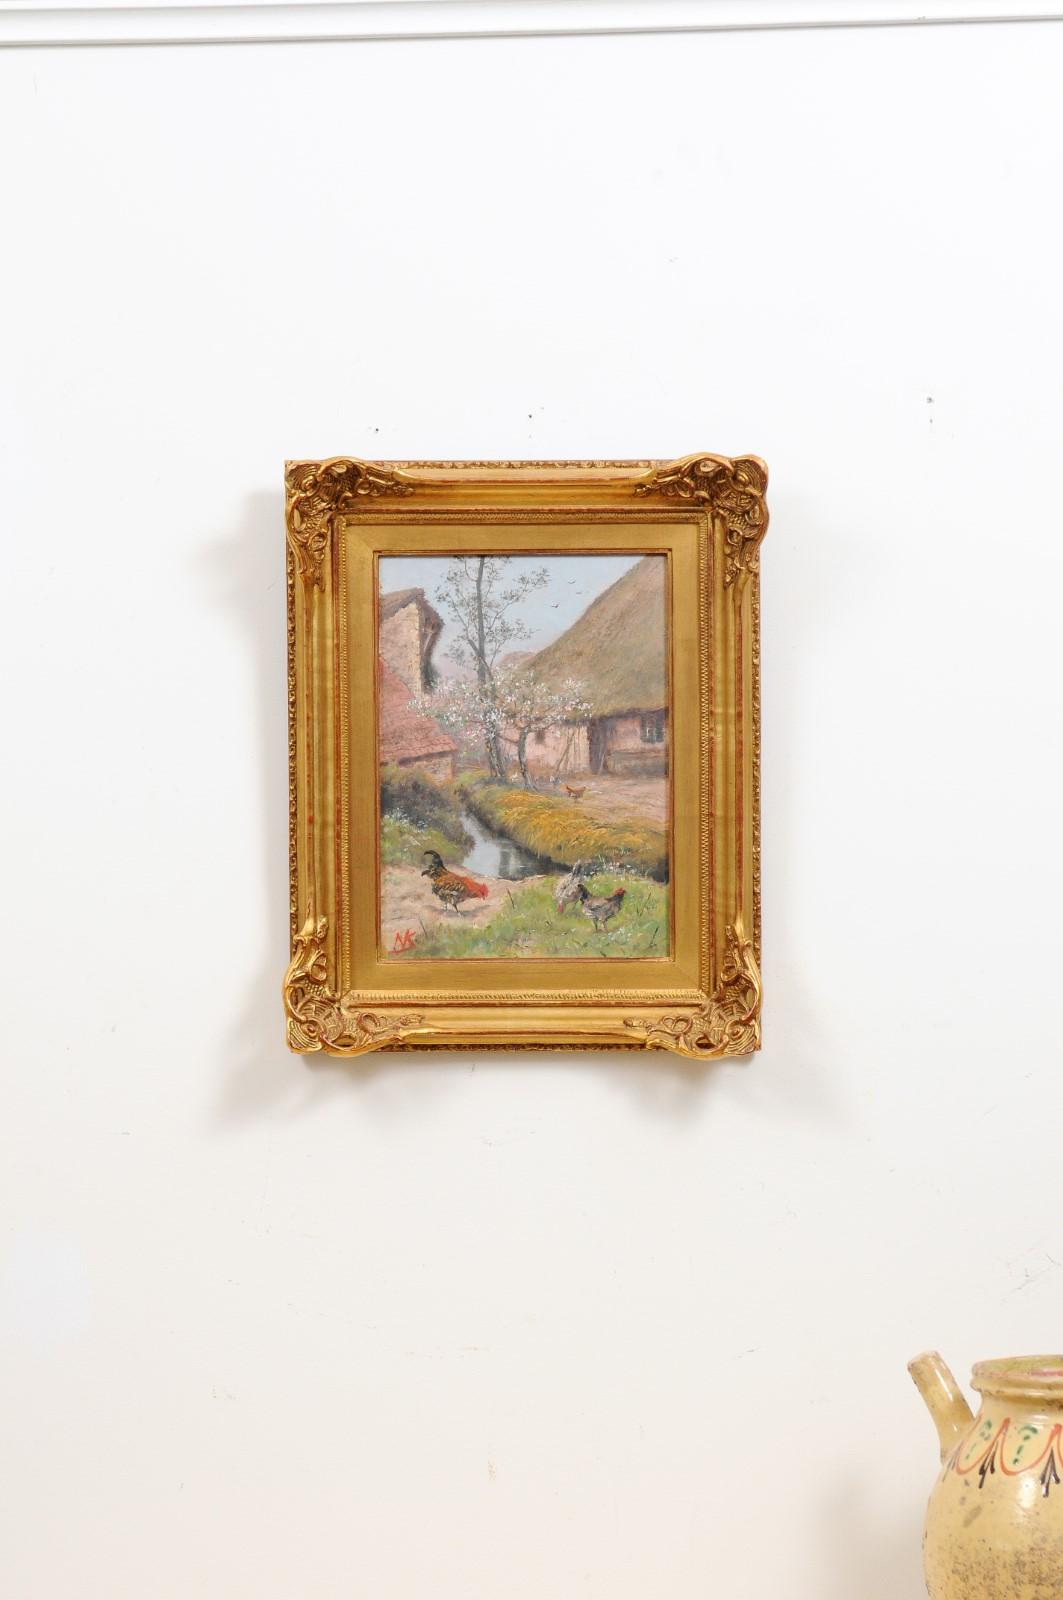 A French framed farmyard painting from the early 19th century, with roosters and chickens, signed Alfred de Knyff, (1819-1885). Created in France during the early years of the 19th century, this framed painting charms us with its humble subject and